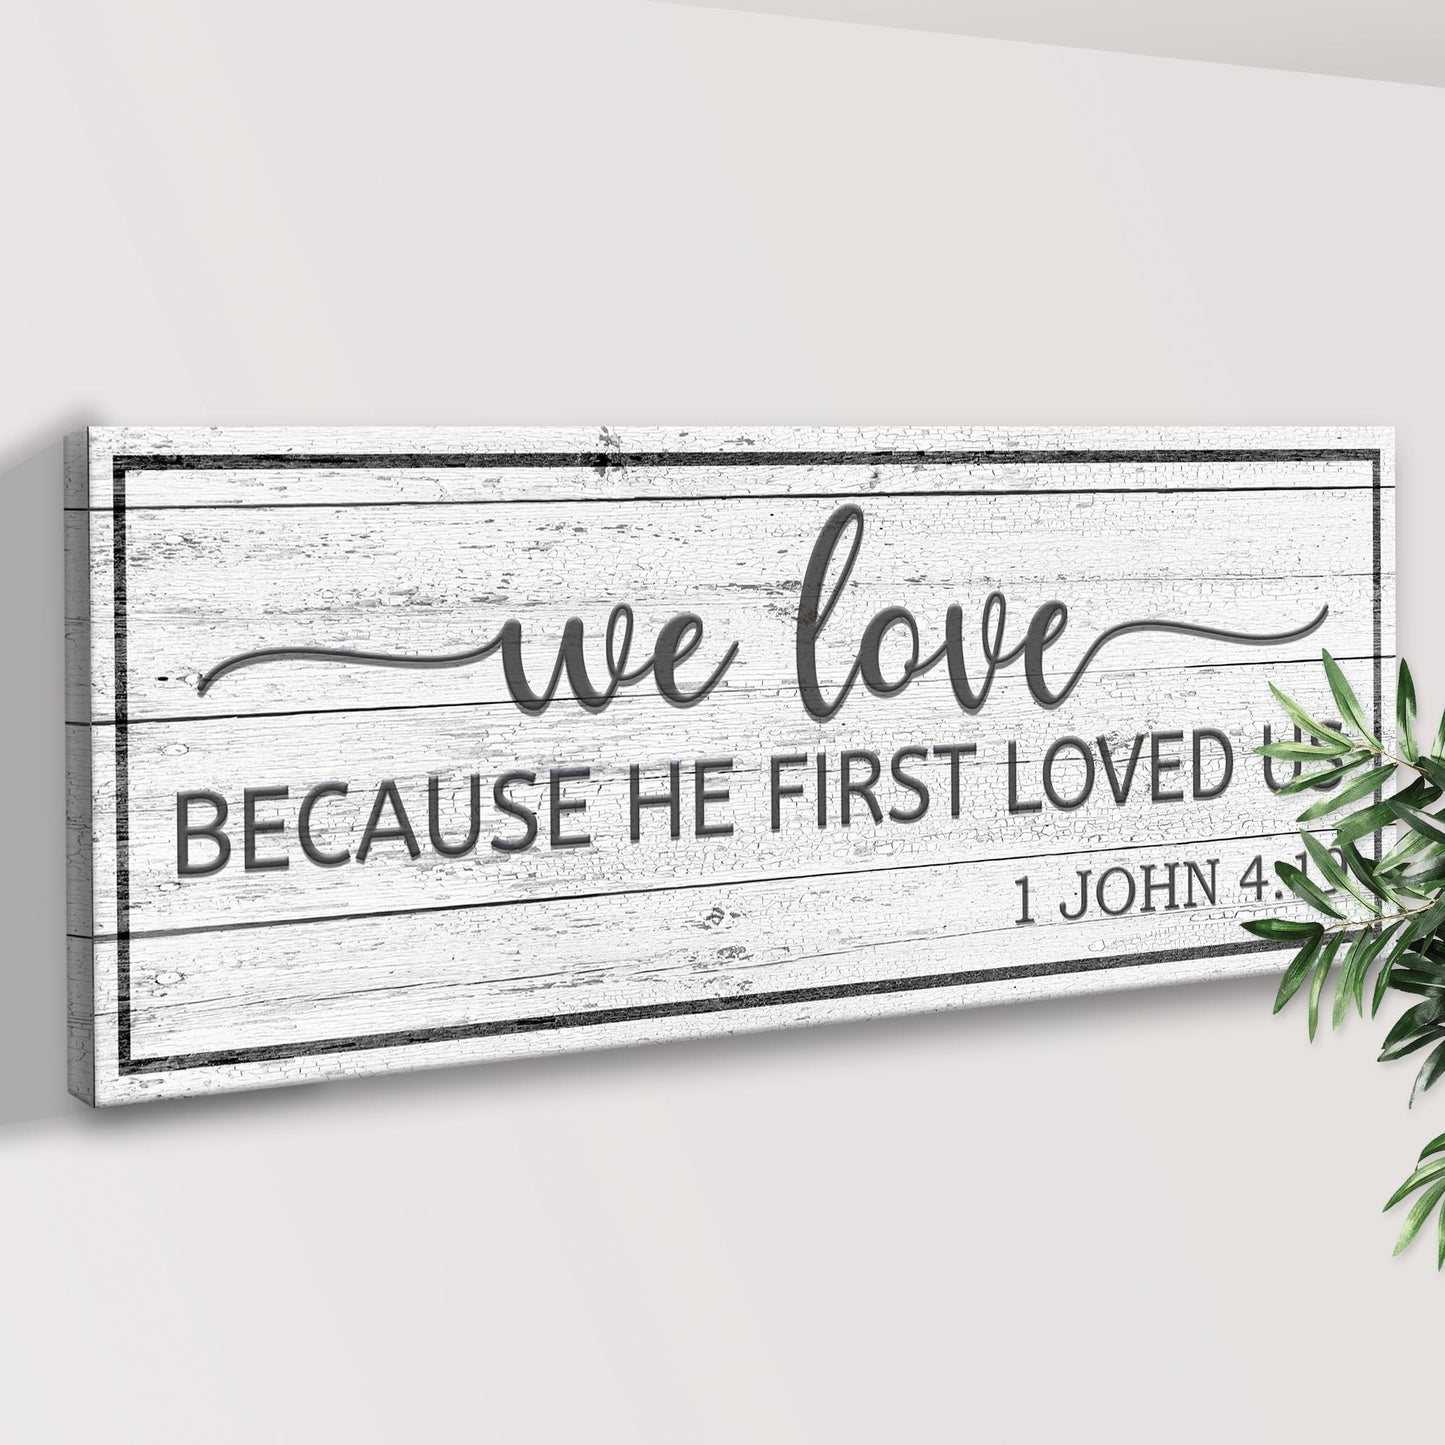 1 John 4:19 Because He First Loved Us Sign Style 2 - Image by Tailored Canvases